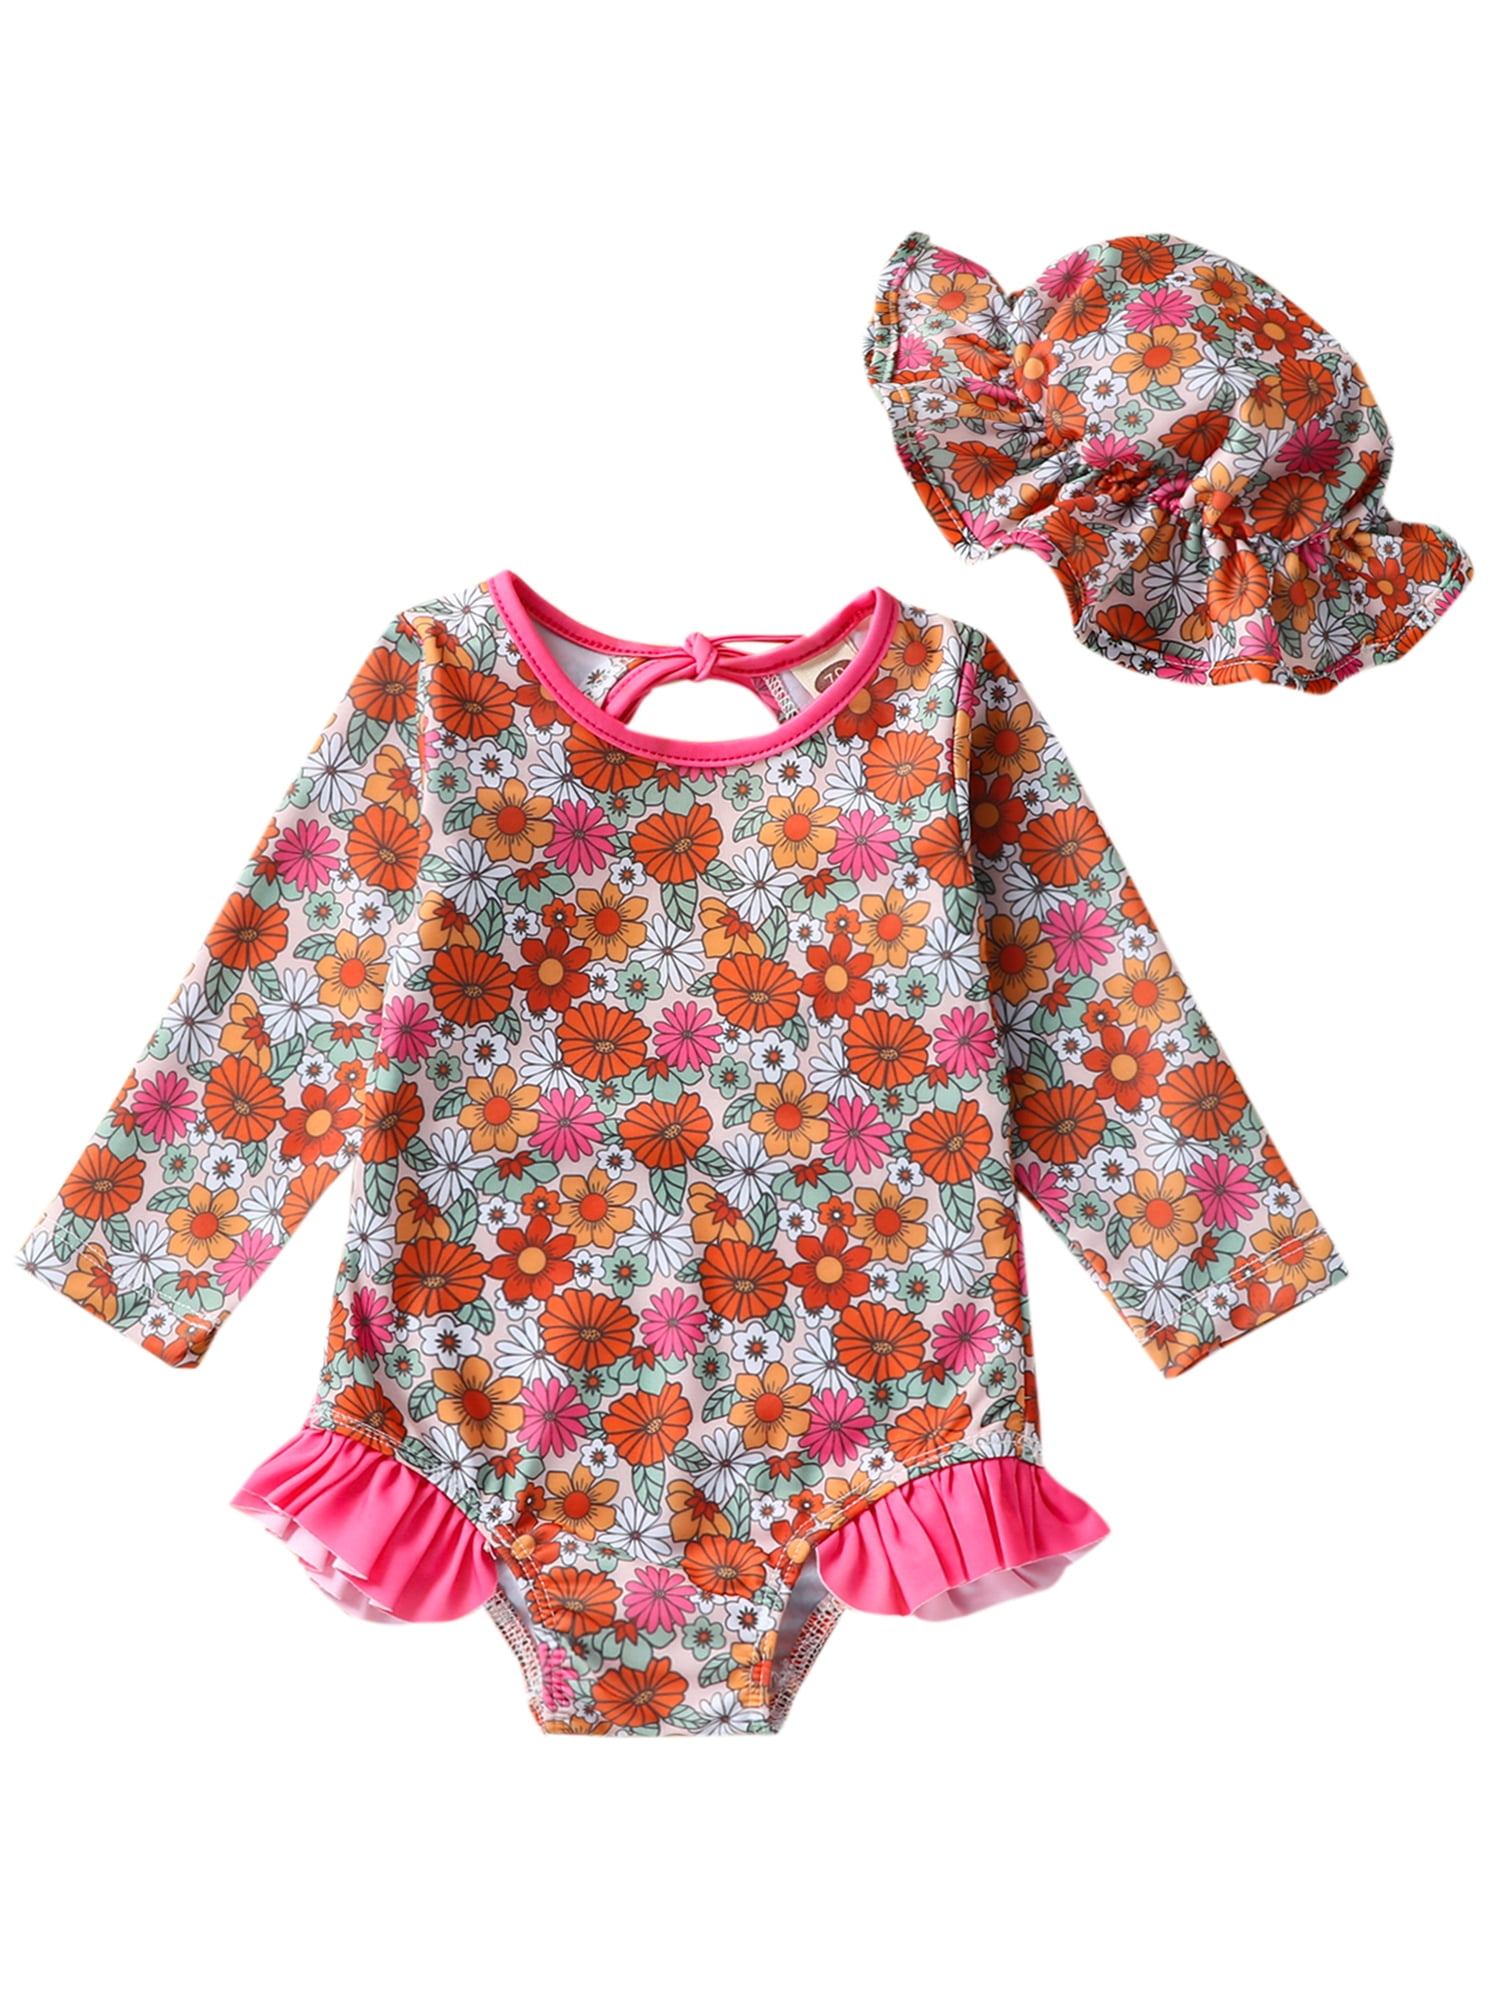 Qtinghua Newborn Baby Girls Floral Swimsuit Long Sleeve Sun Protection ...